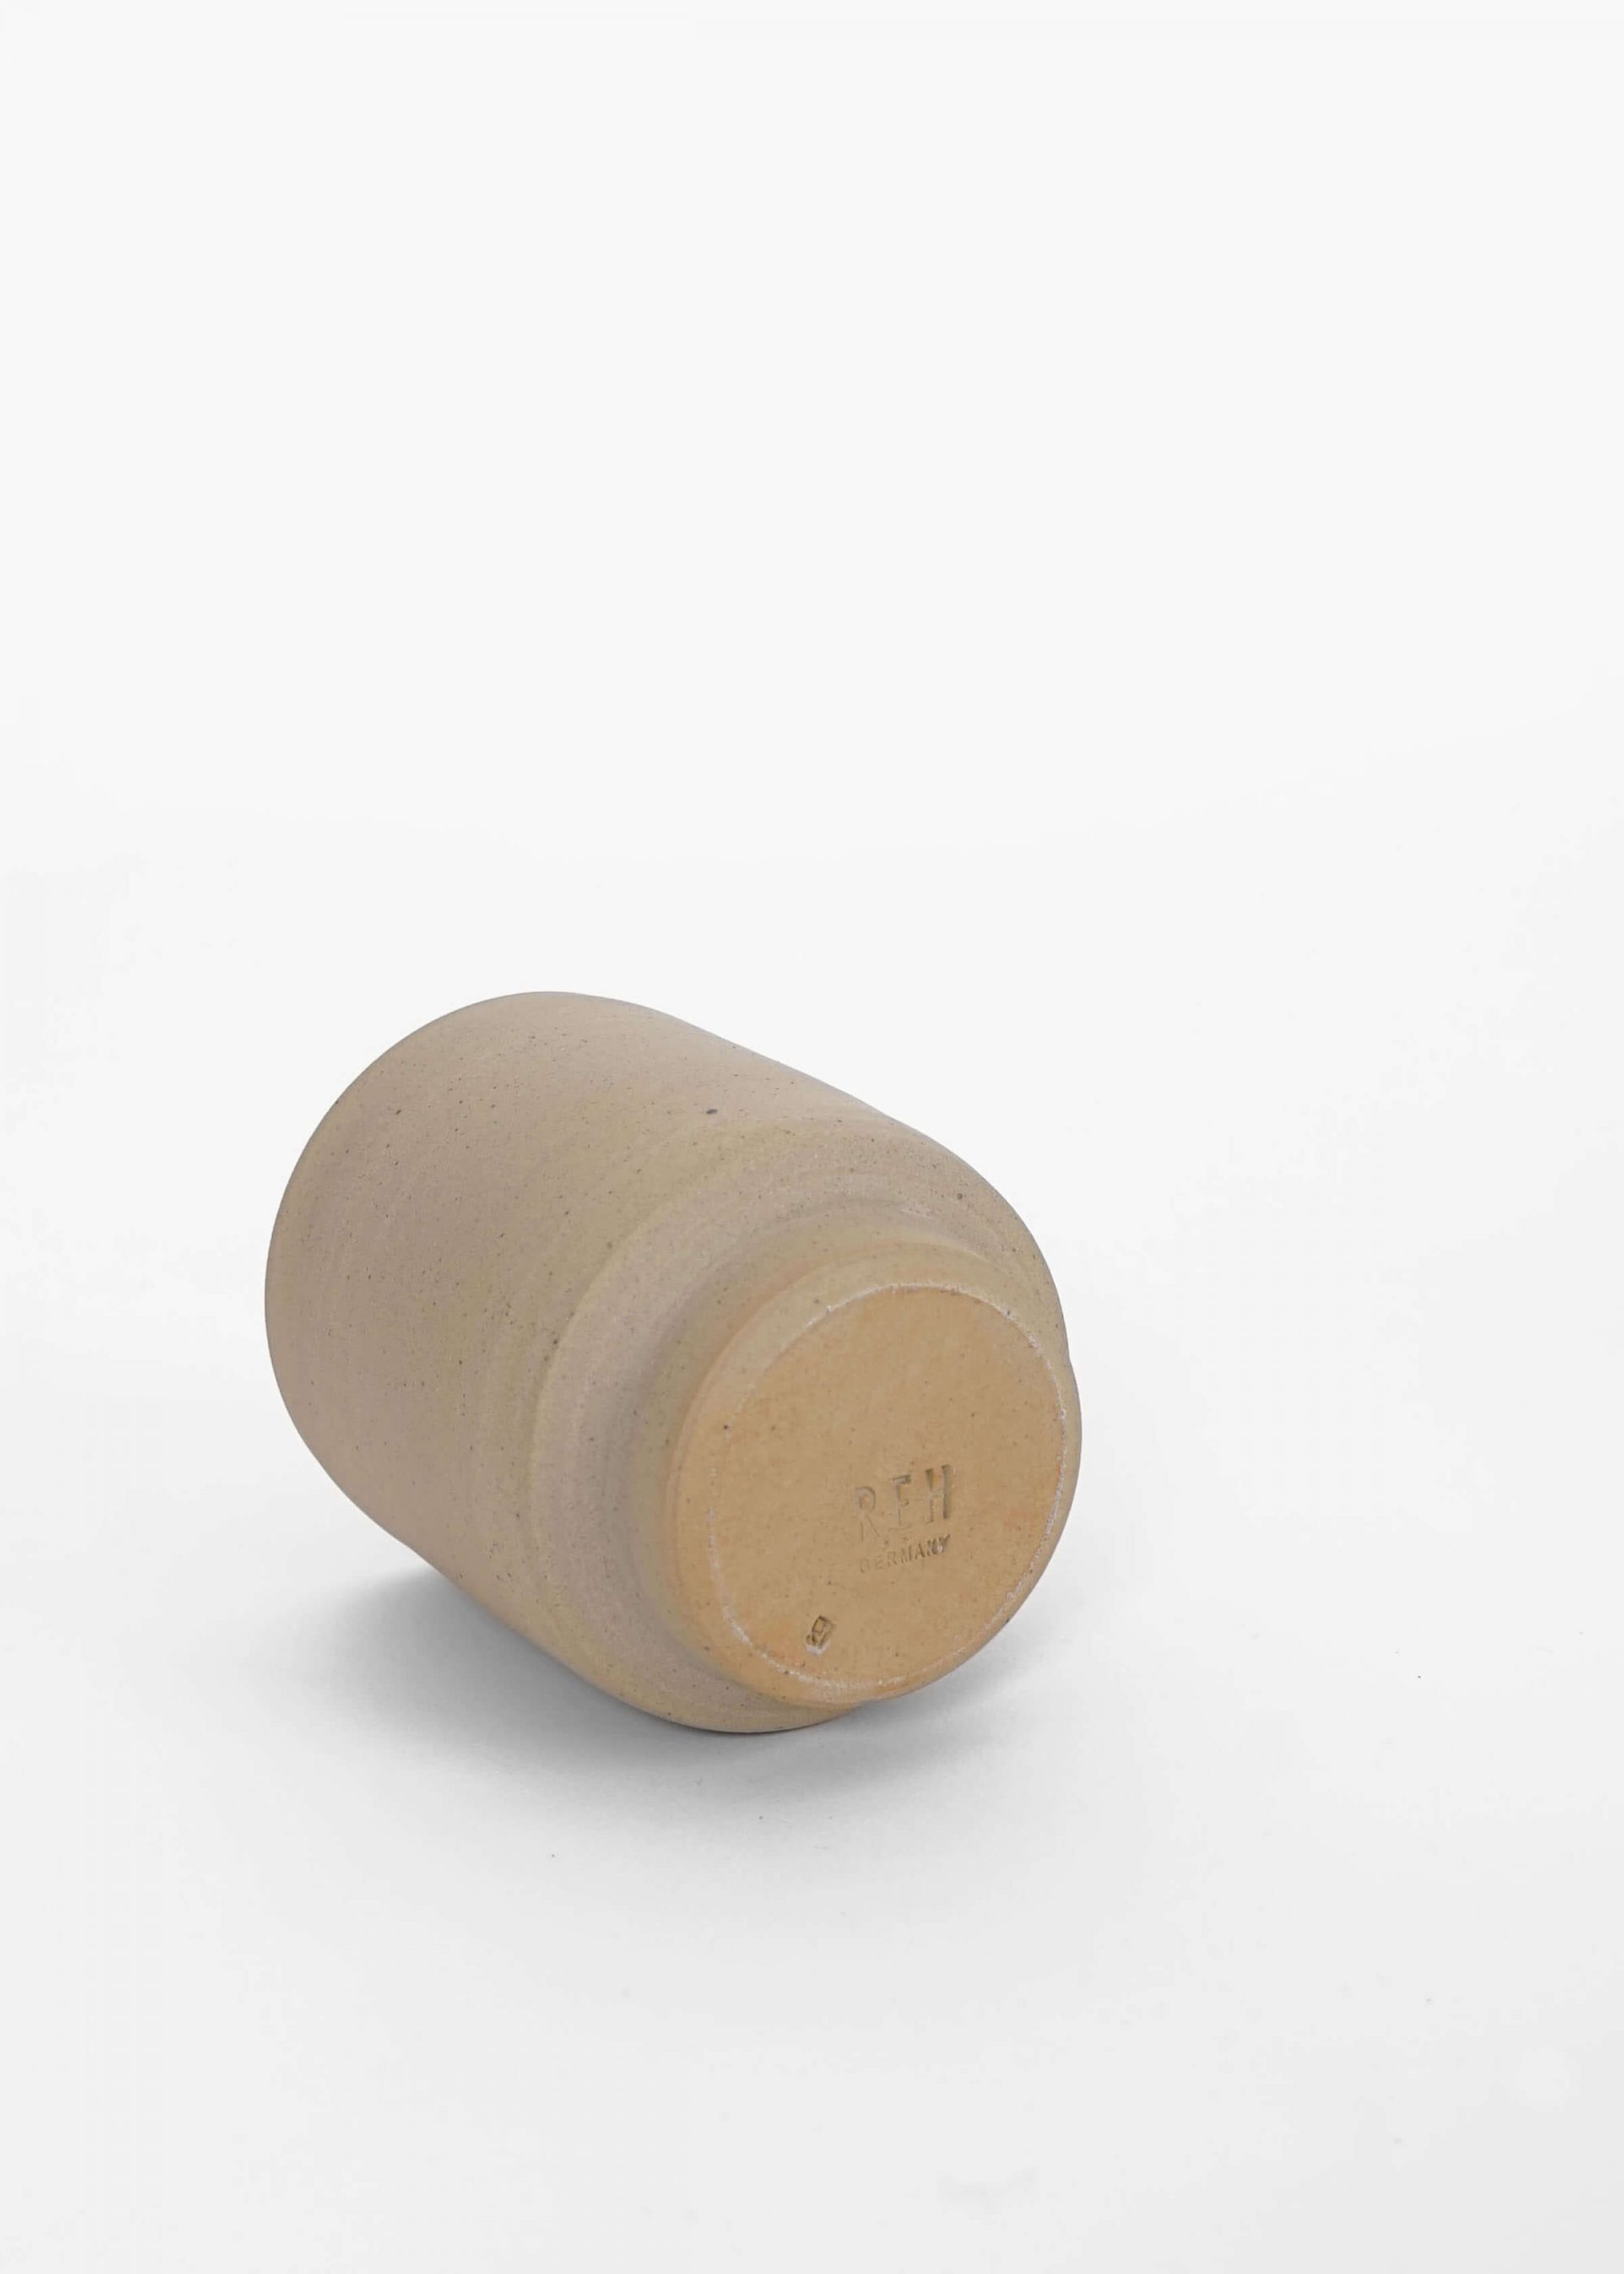 Product image for N° ICSF2 Beuys Egg Cup